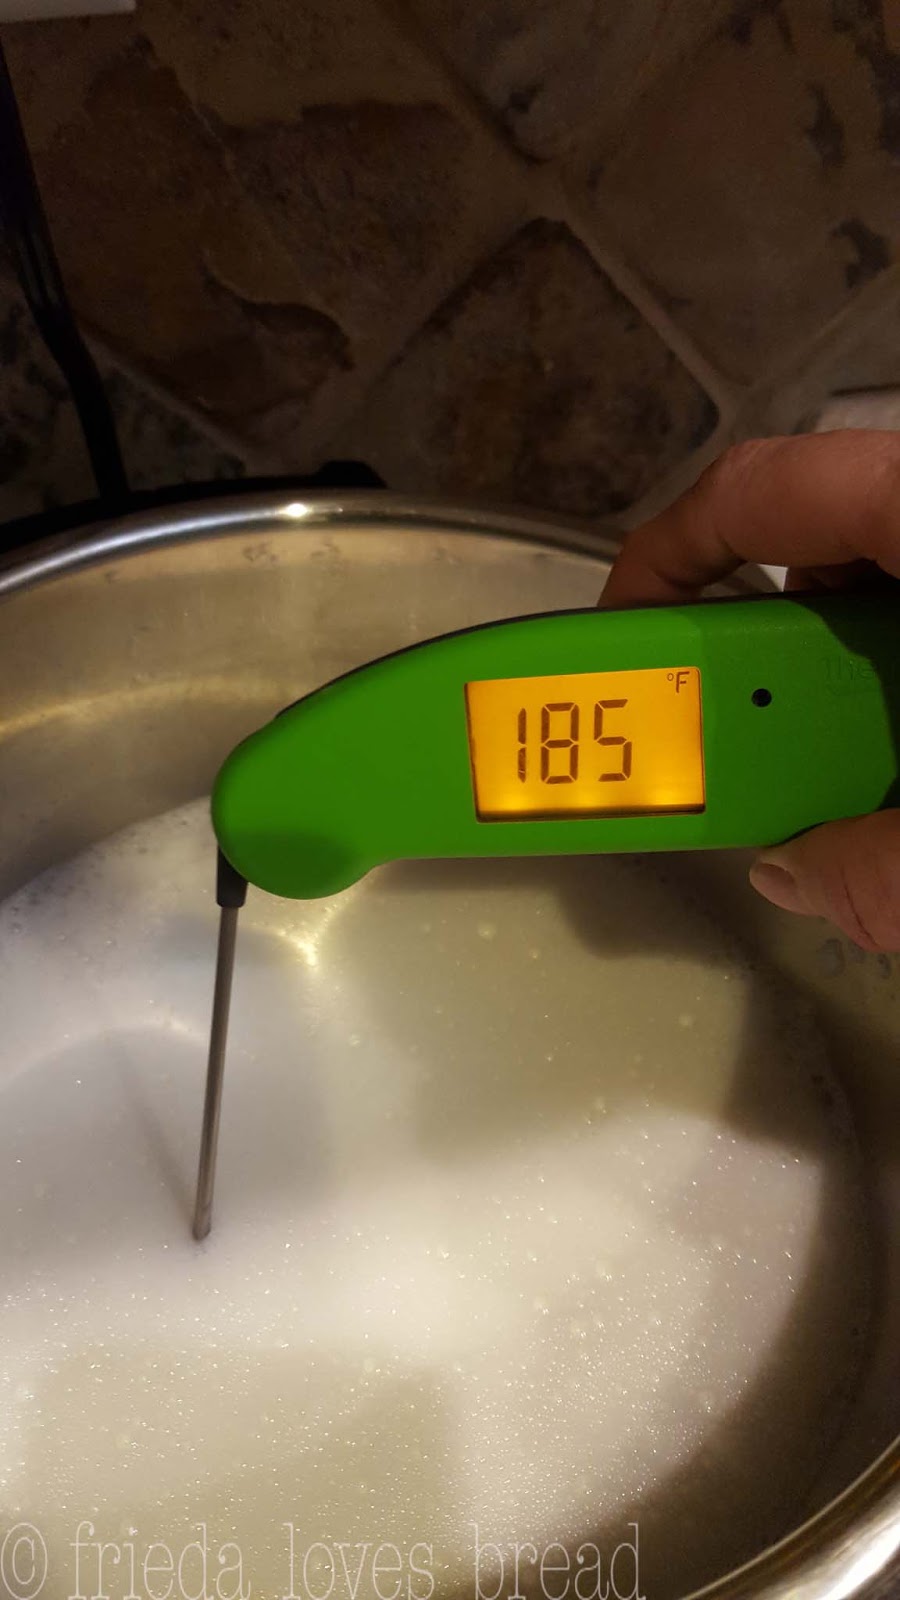 Frieda Loves Bread: Thermapen Digital Food Thermometer - A Cool